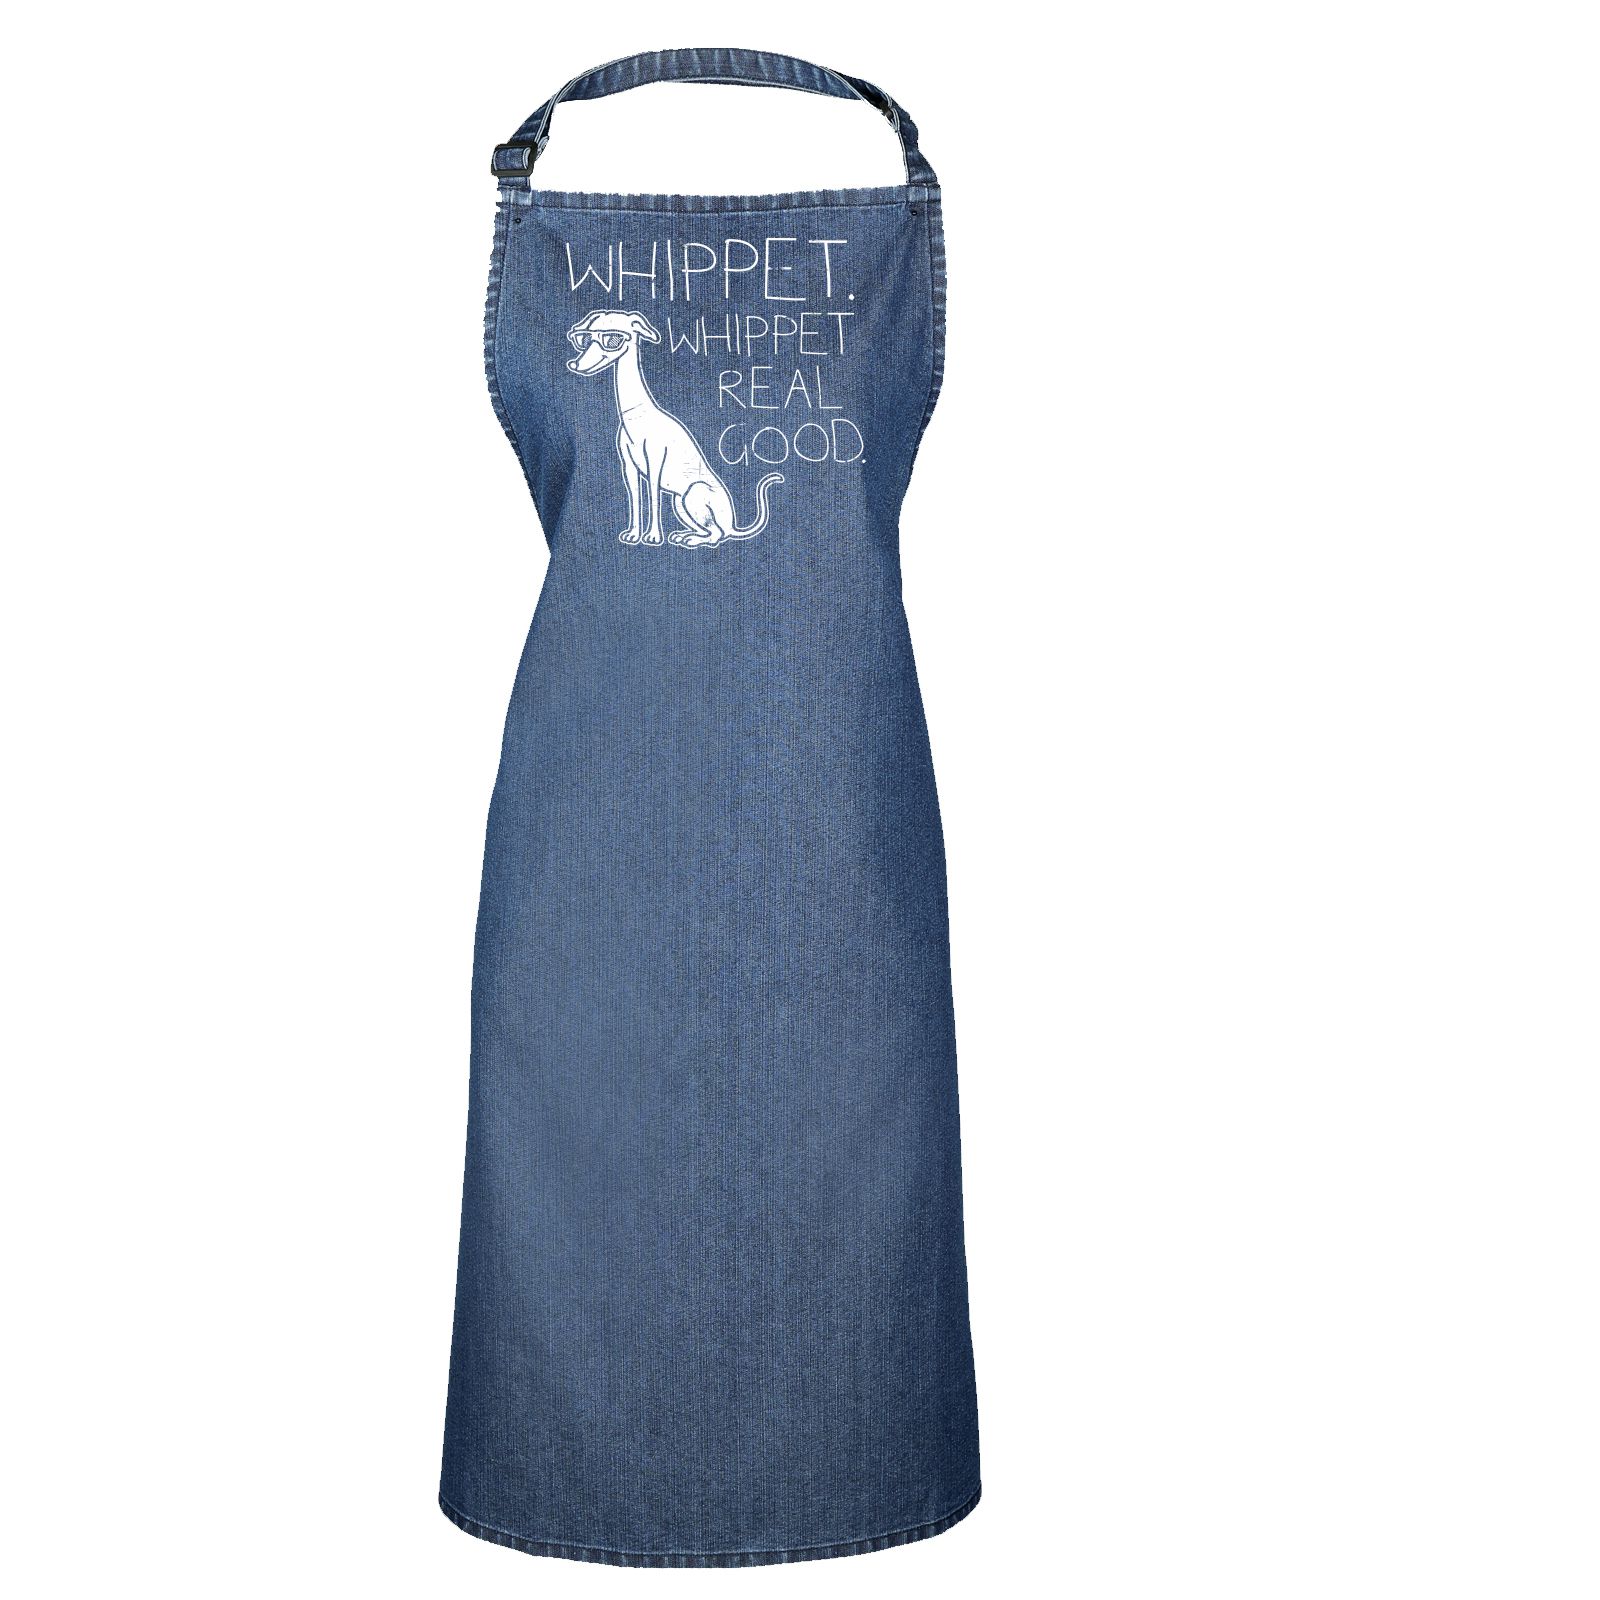 Whippet Whippet Real Good Funny Novelty Apron Kitchen Cooking 